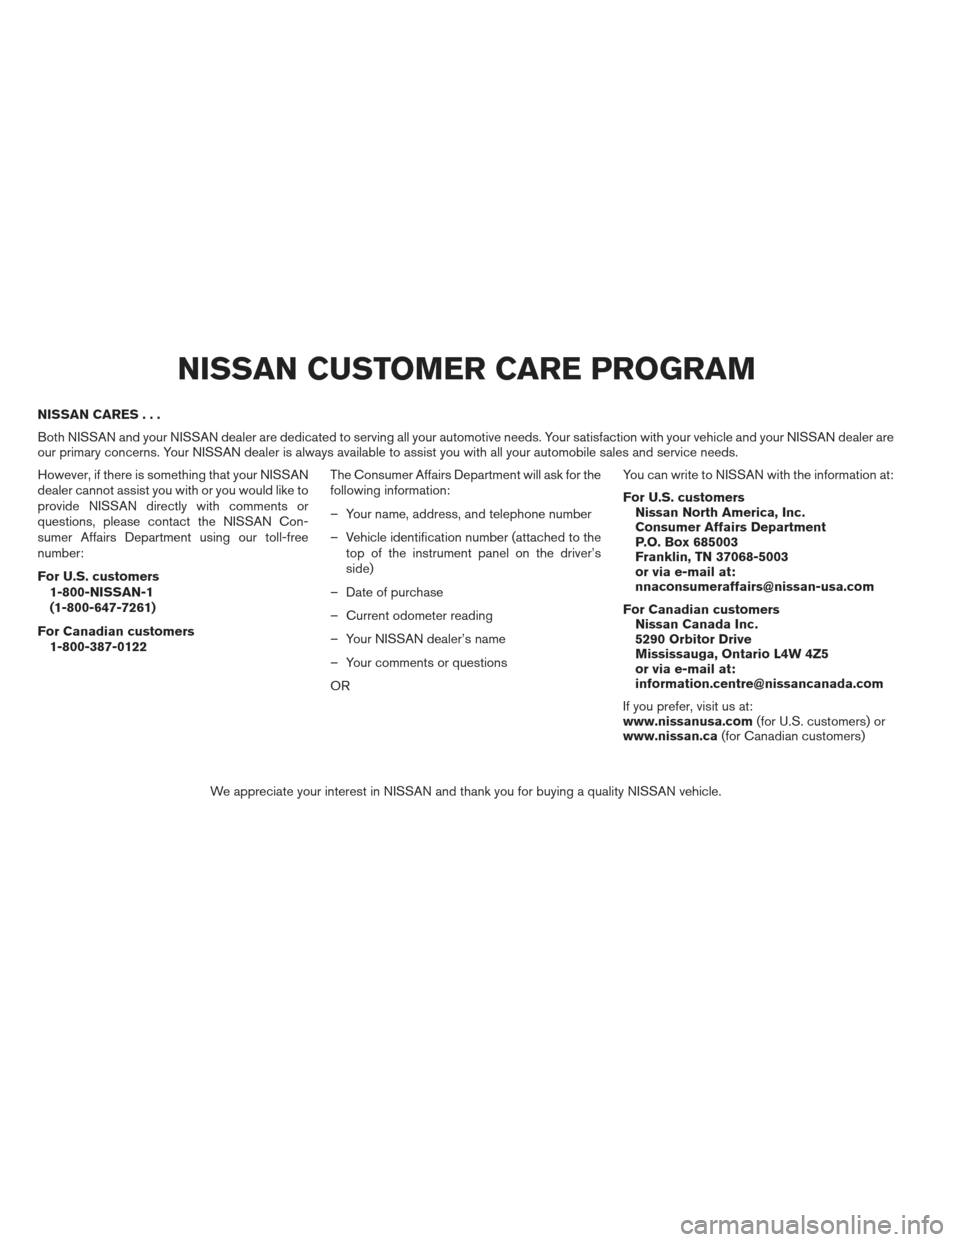 NISSAN SENTRA 2013 B17 / 7.G Owners Manual NISSAN CARES...
Both NISSAN and your NISSAN dealer are dedicated to serving all your automotive needs. Your satisfaction with your vehicle and your NISSAN dealer are
our primary concerns. Your NISSAN 